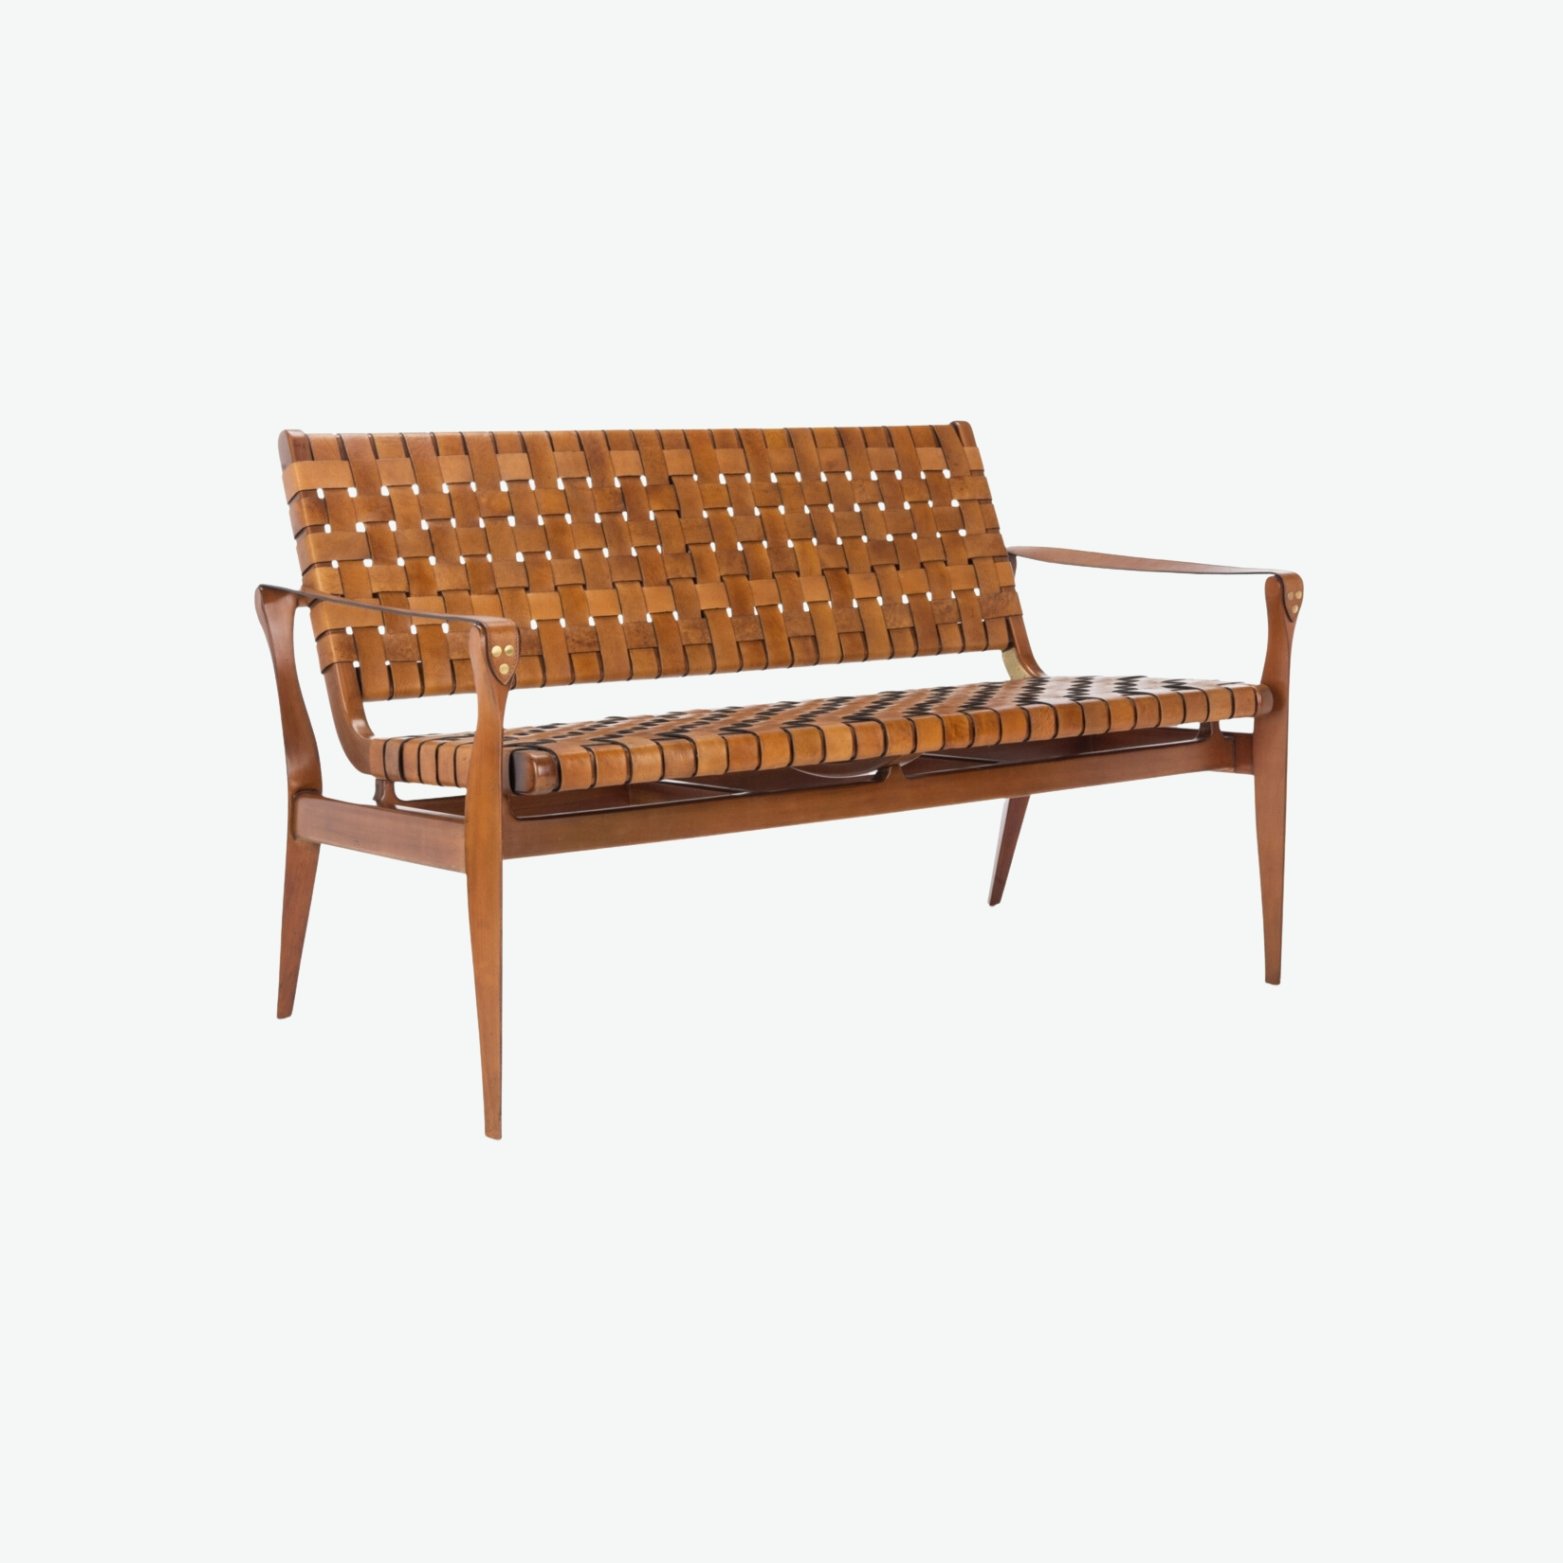 Leather Weave Bench, Wood Legs and Arm Rests.jpg